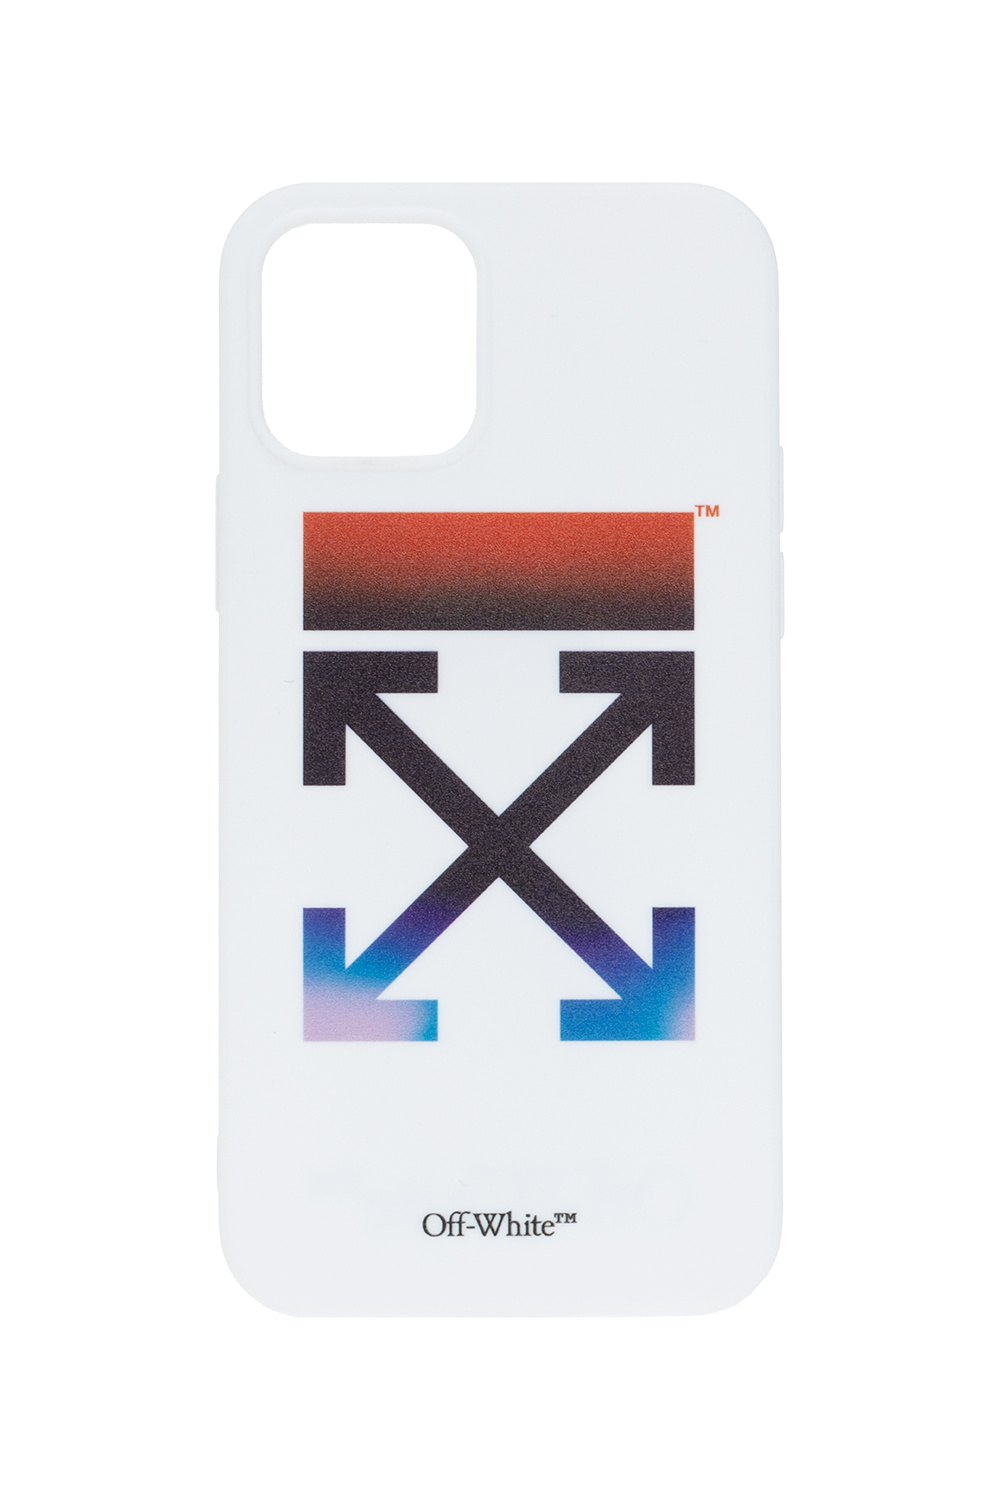 Off-White iPhone 12 Pro case